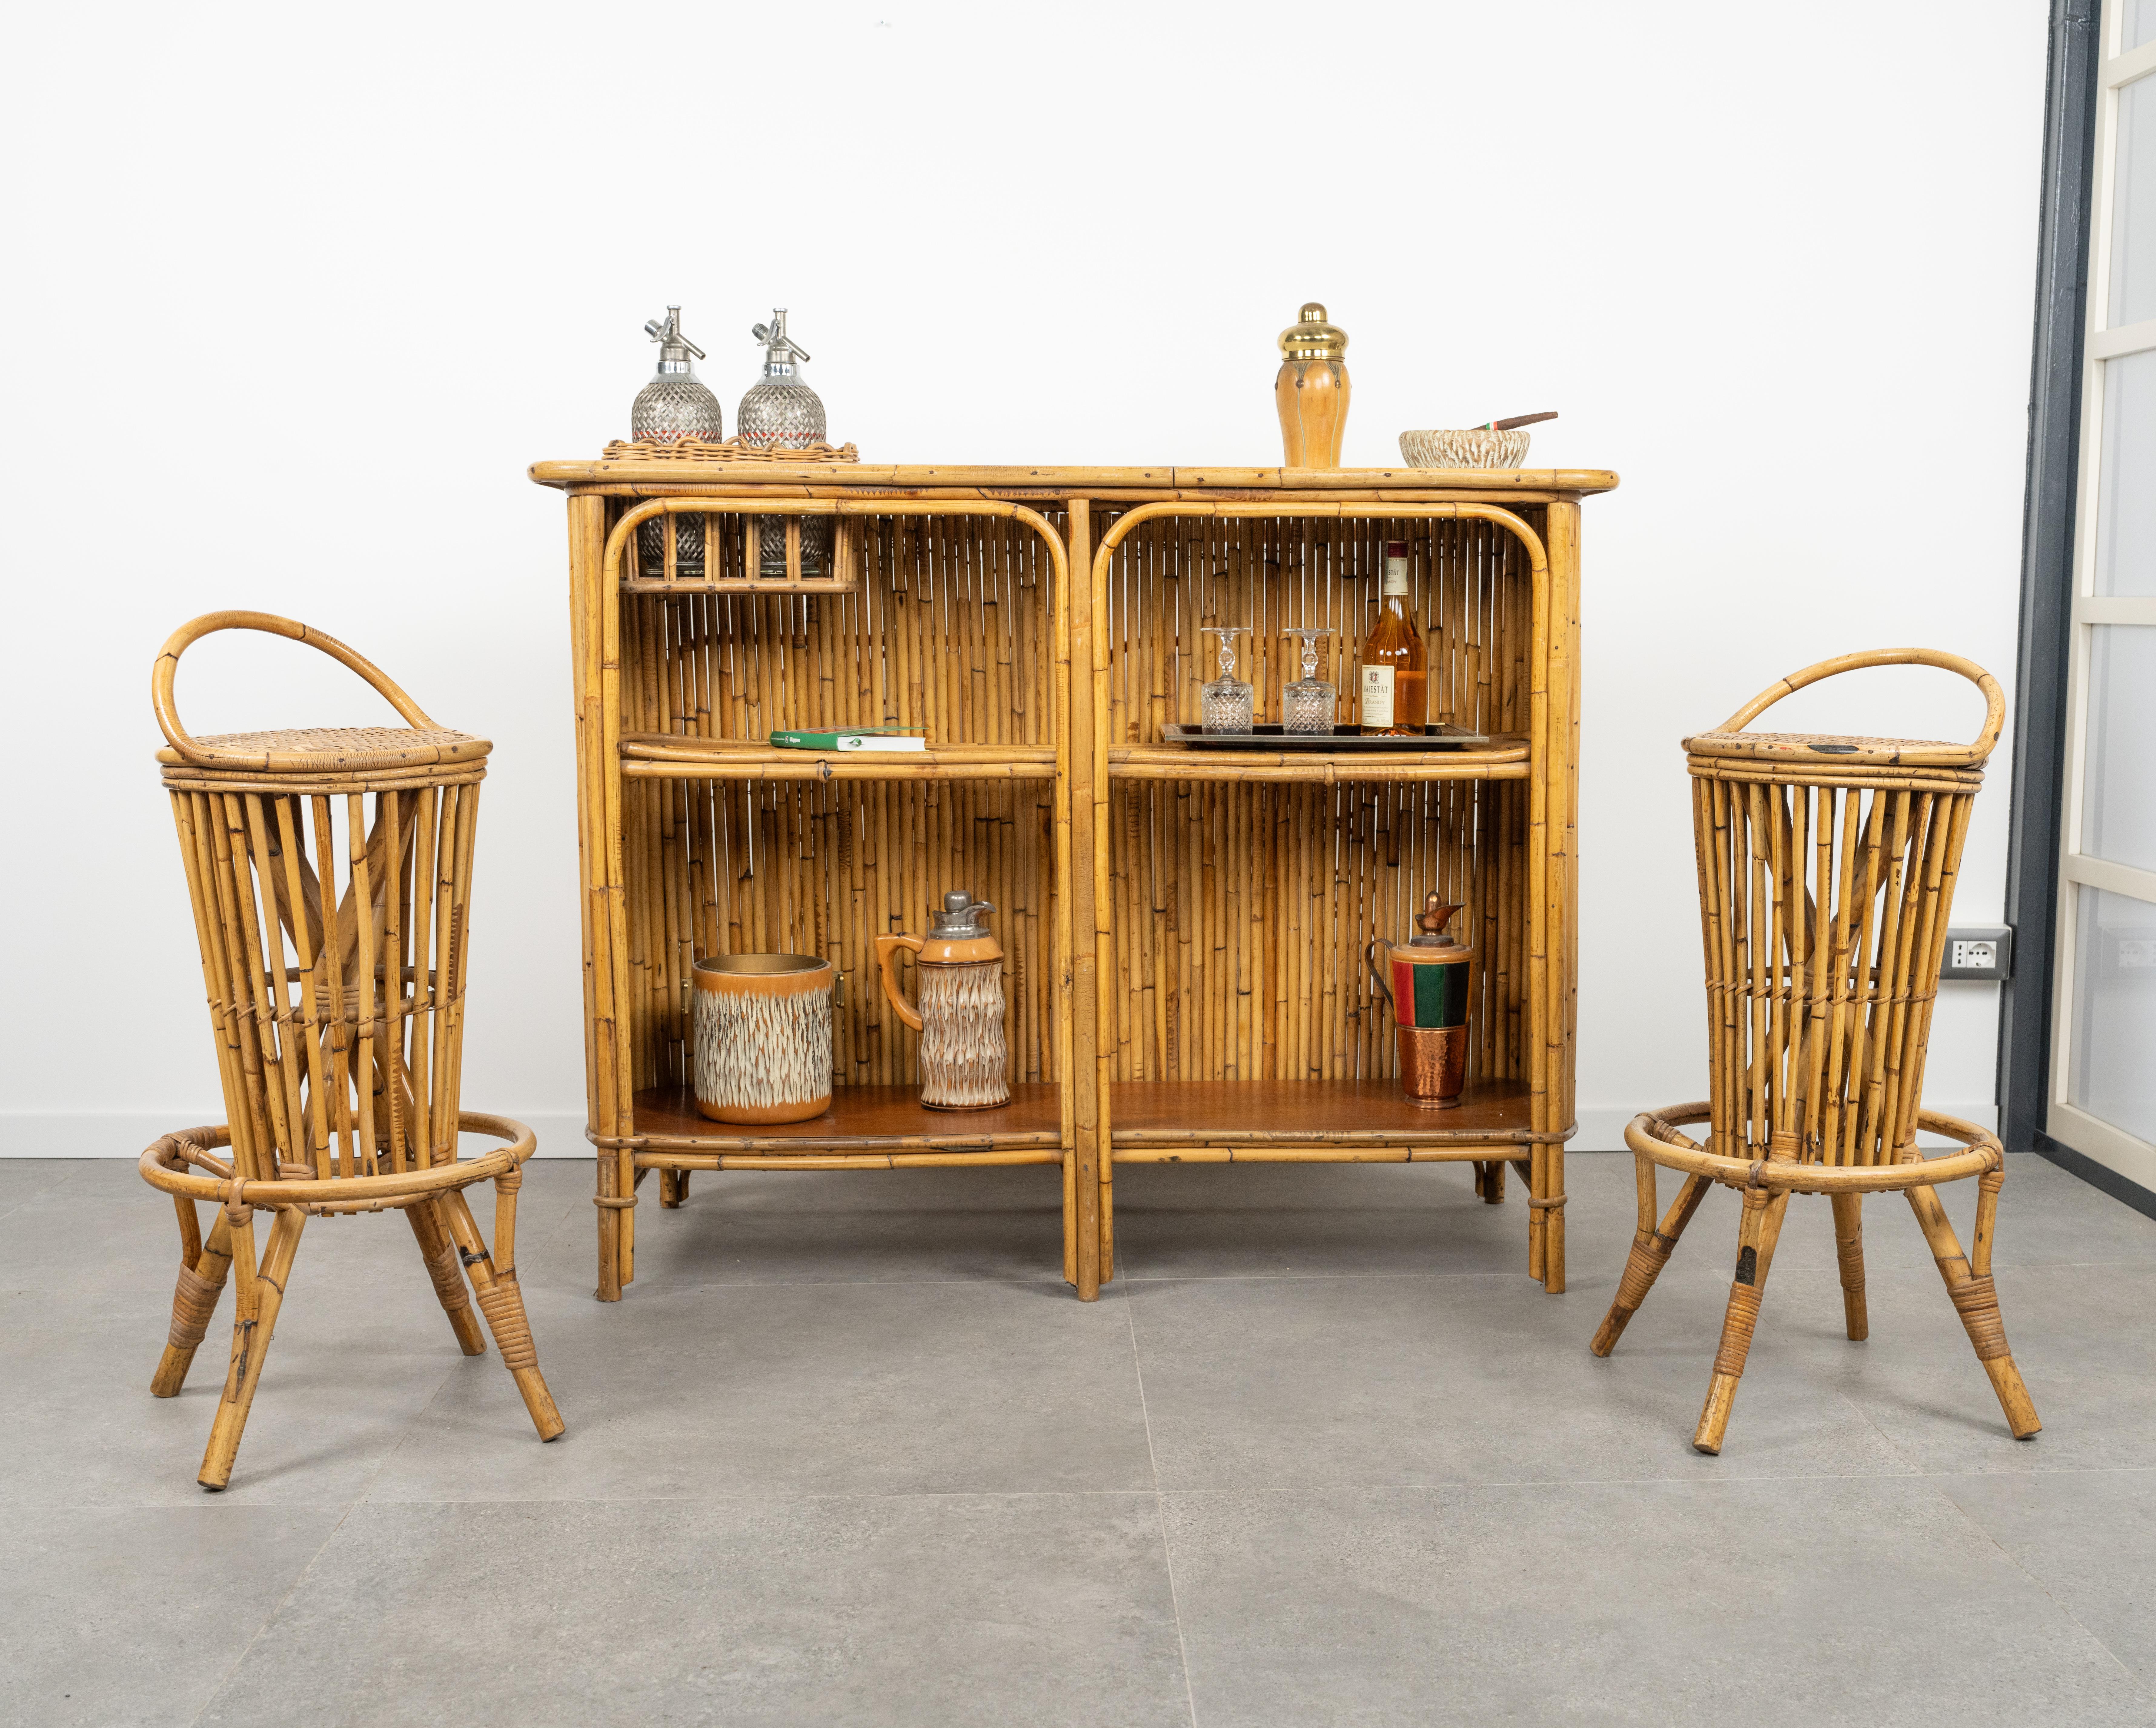 Bamboo and Rattan Cabinet Bar with Two Stools by Tito Agnoli, Italy 1950s For Sale 3